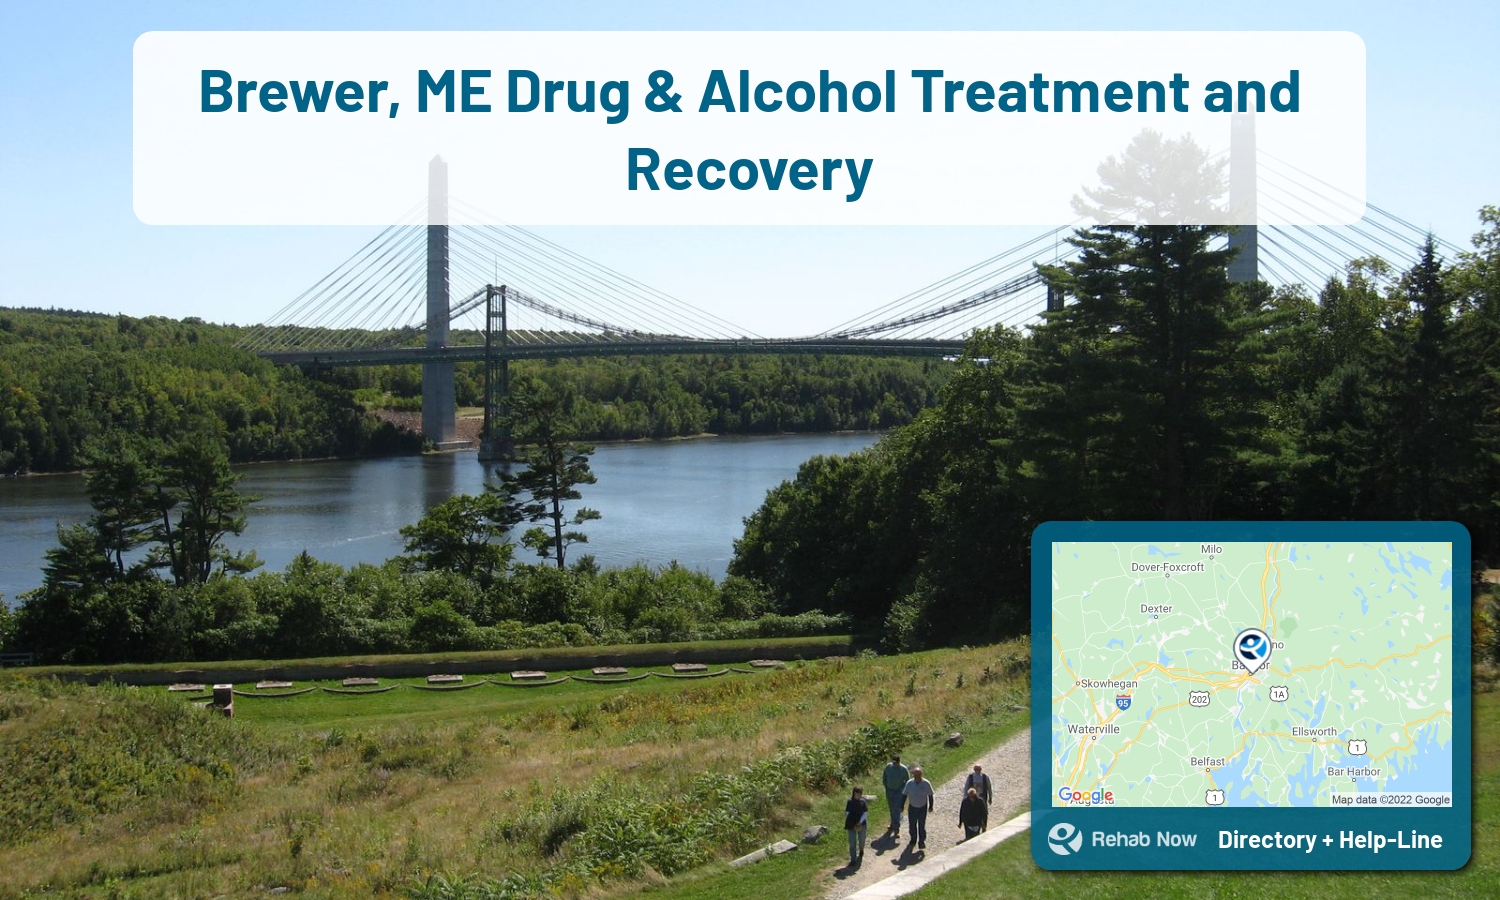 Brewer, ME Treatment Centers. Find drug rehab in Brewer, Maine, or detox and treatment programs. Get the right help now!